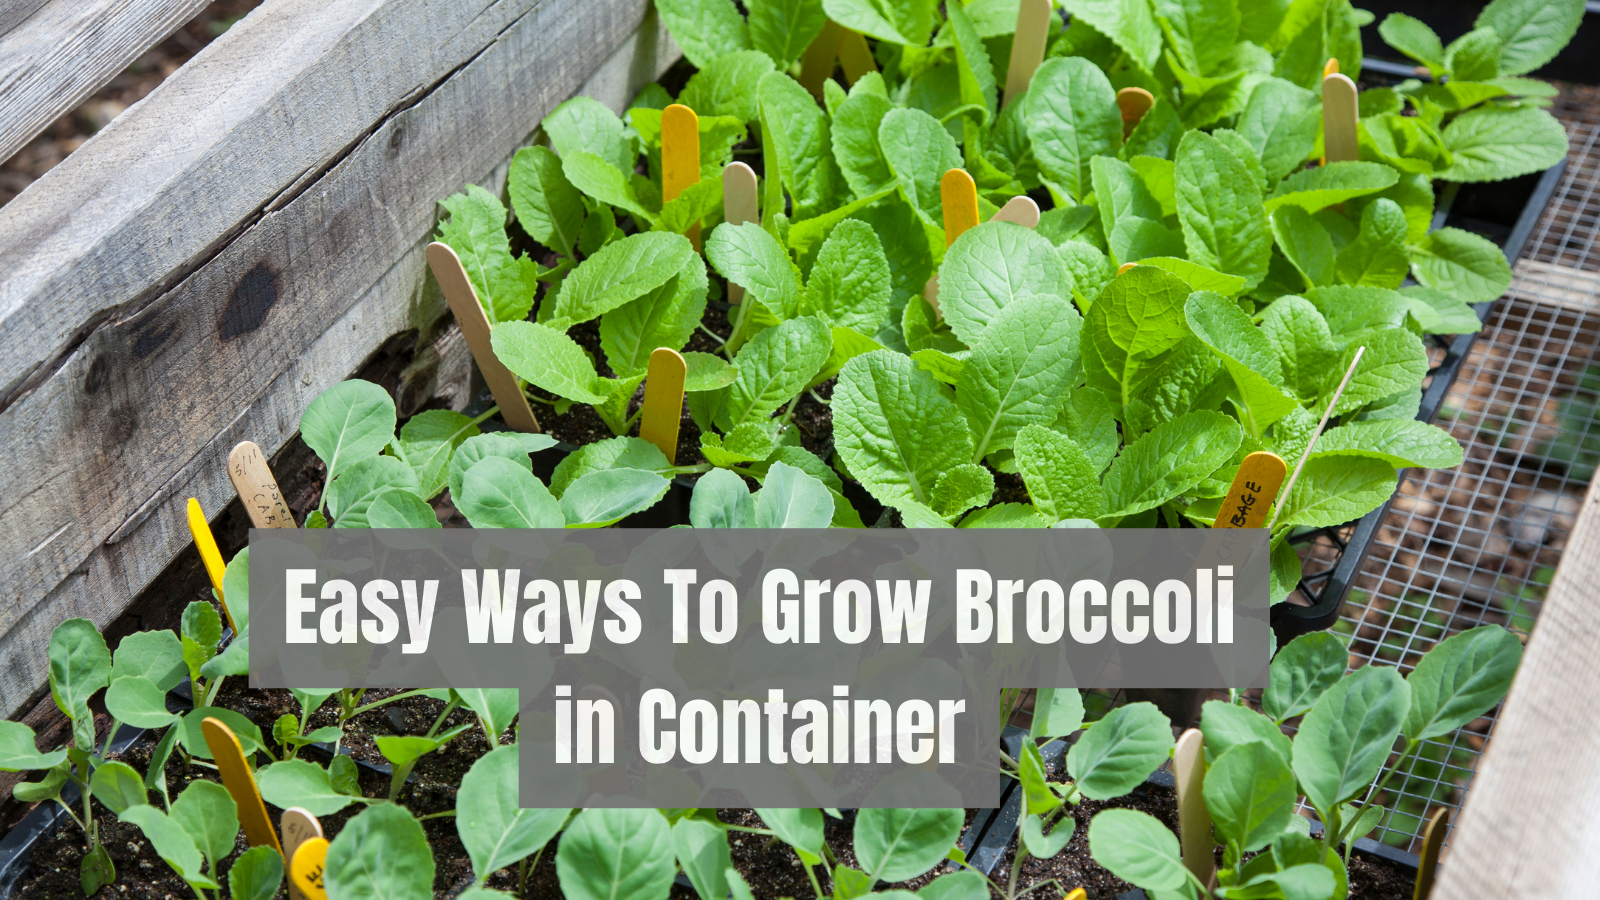 Easy Ways To Grow Broccoli In Containers